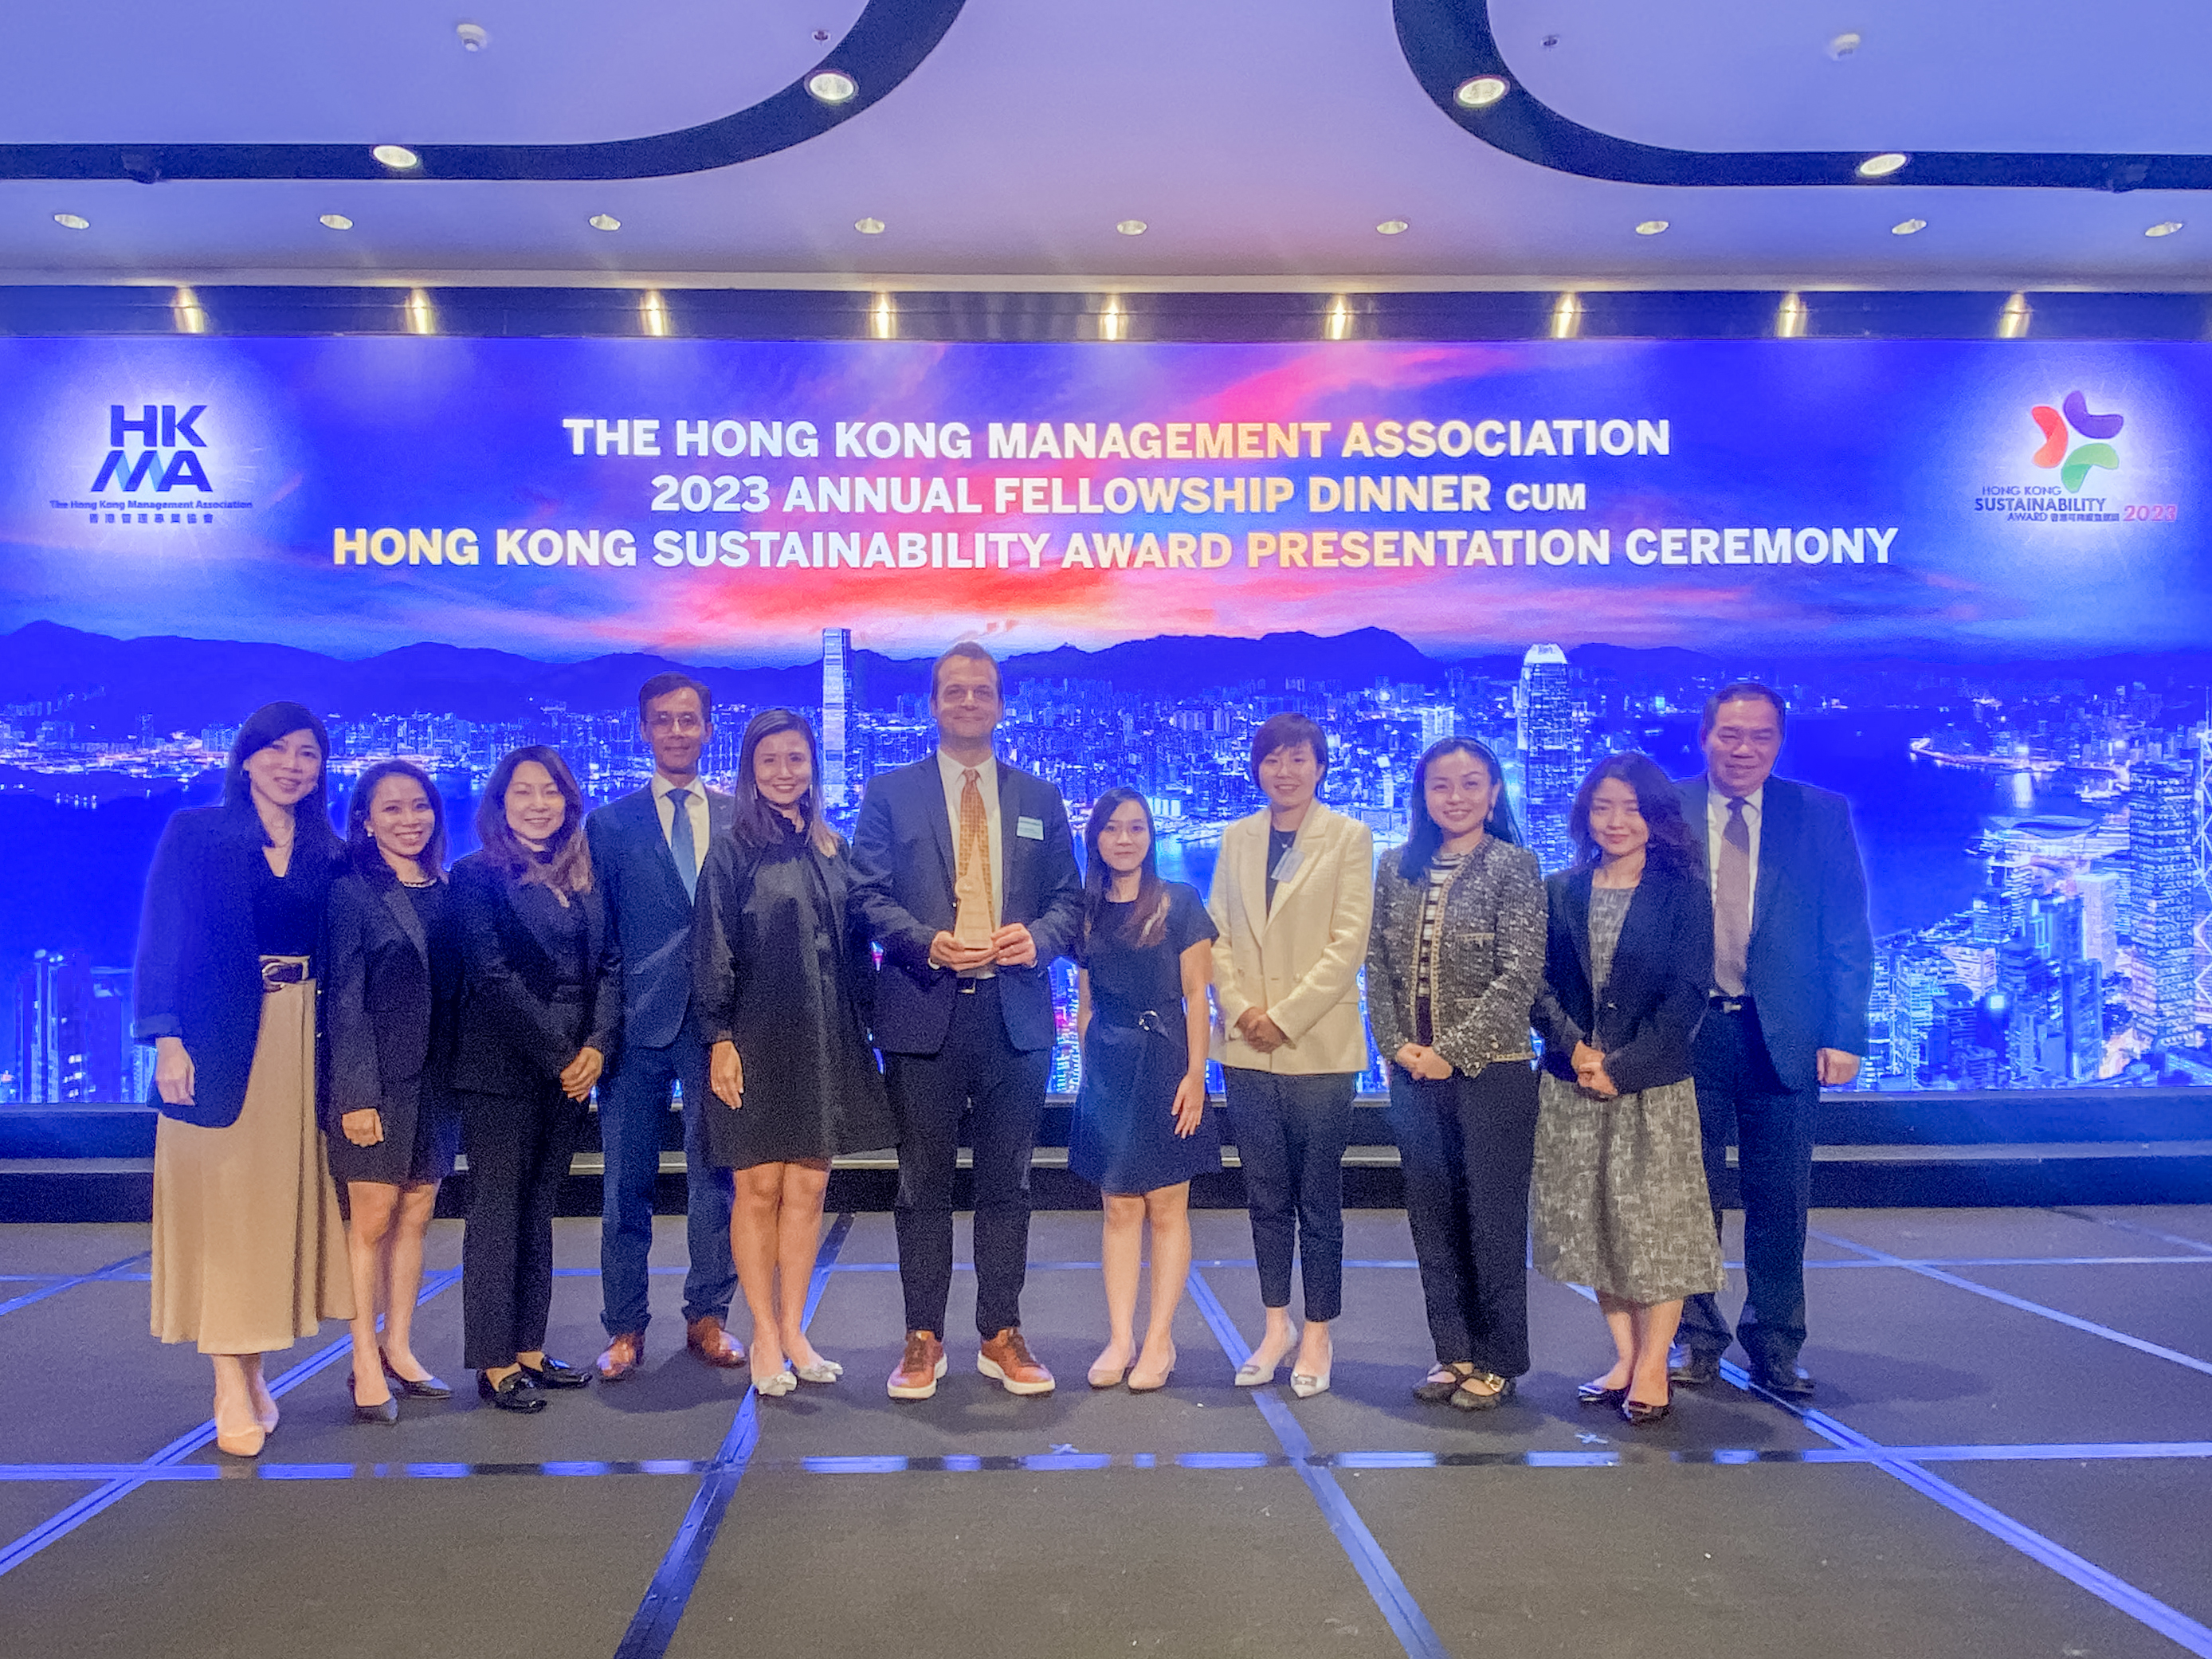 Recognized at the Hong Kong Sustainability Award 2023 organized by the Hong Kong Management Association, Hang Lung secures the Distinction Award (Large Organization Category), reaffirming its commitment to driving sustainable business growth